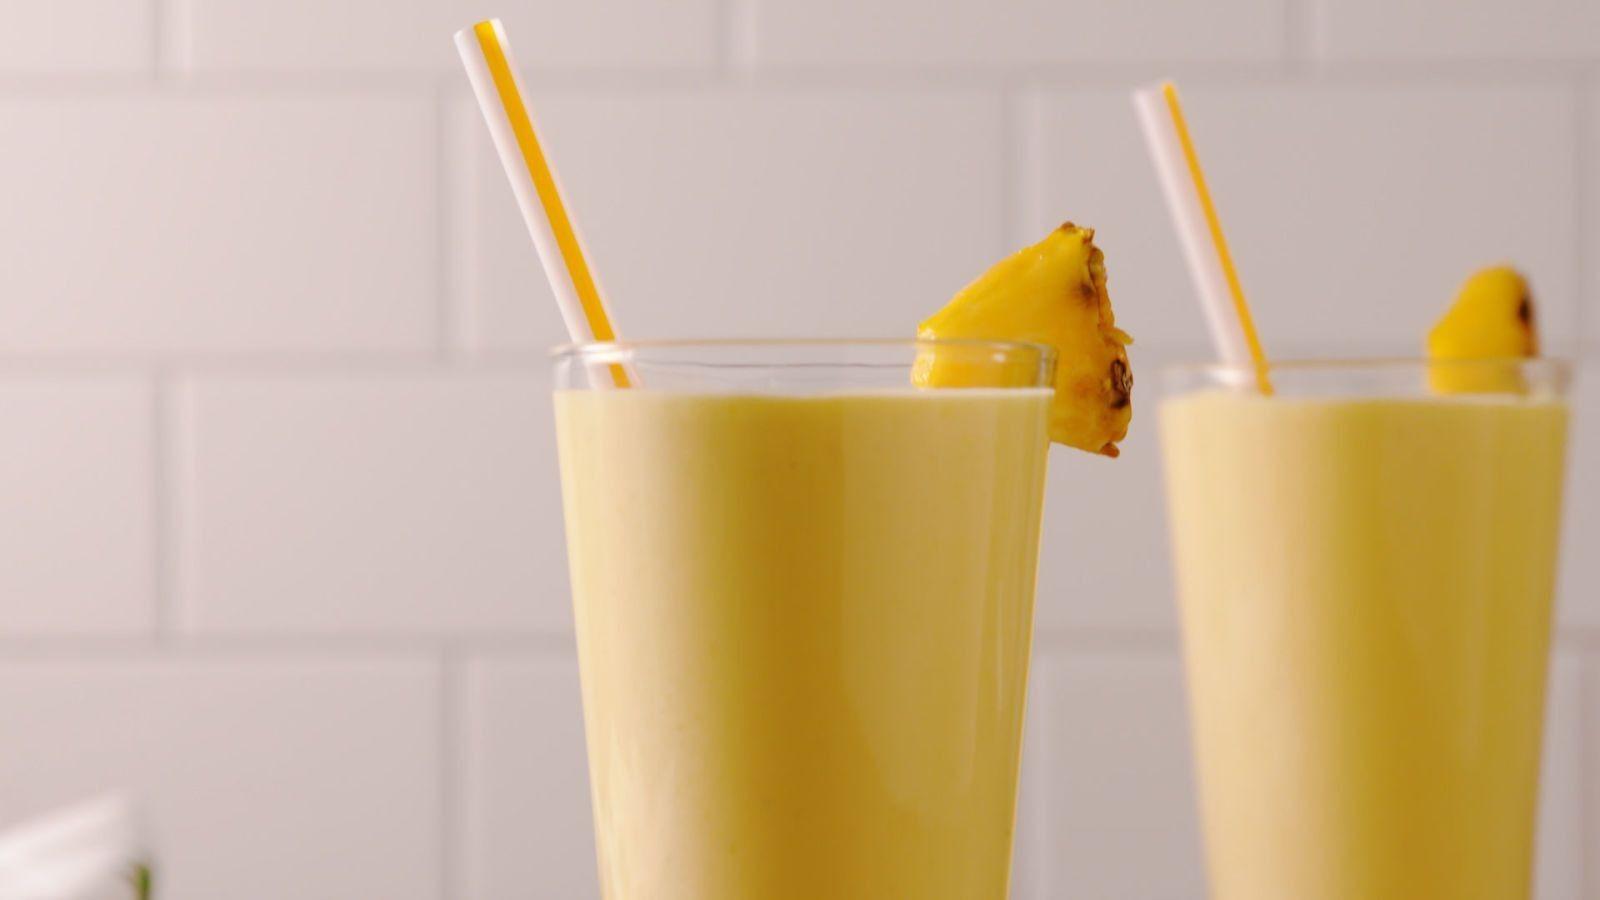 Smoothie Wallpaper Awesome 18 Best Banana Smoothies Image On